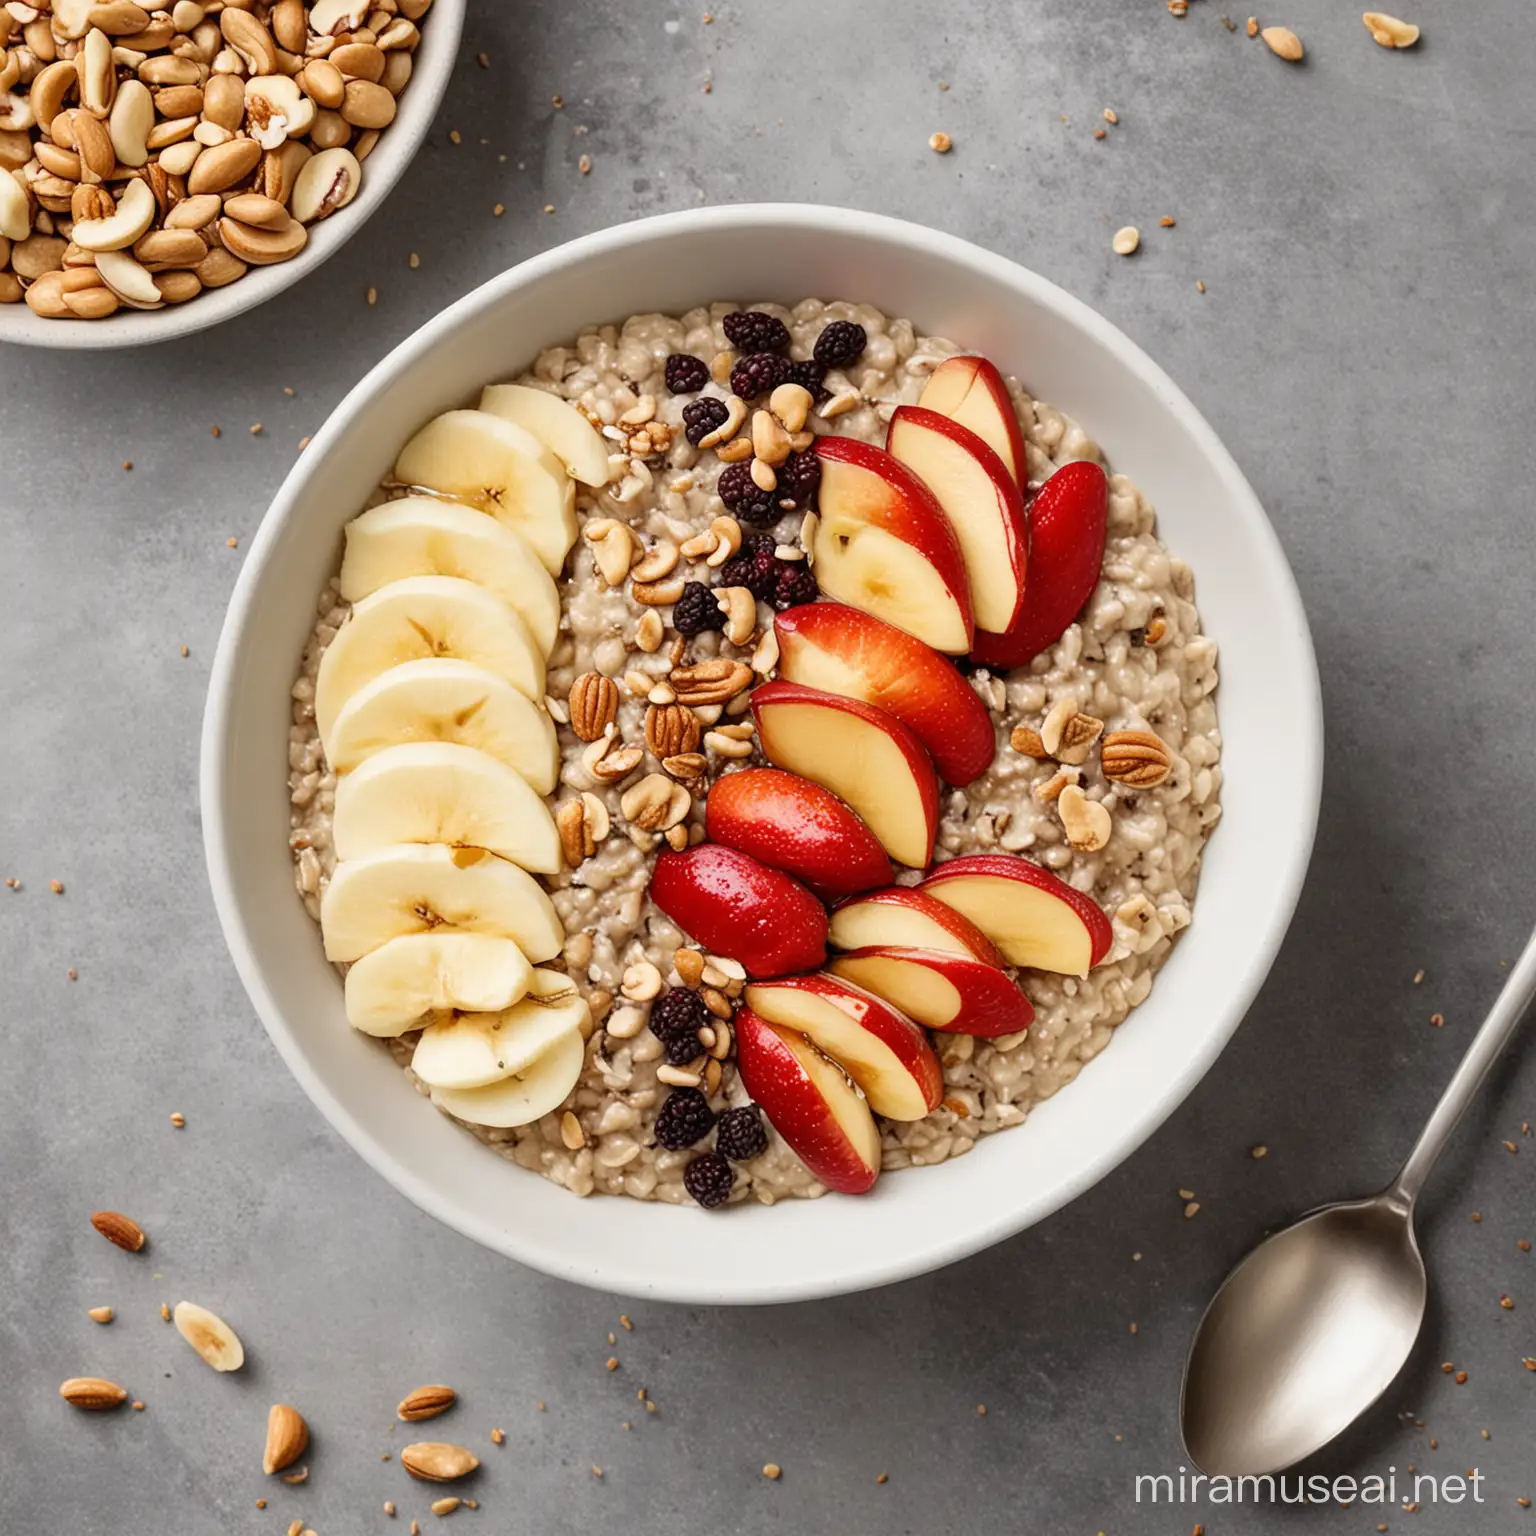 Healthy Oatmeal Breakfast with Fruits and Nuts